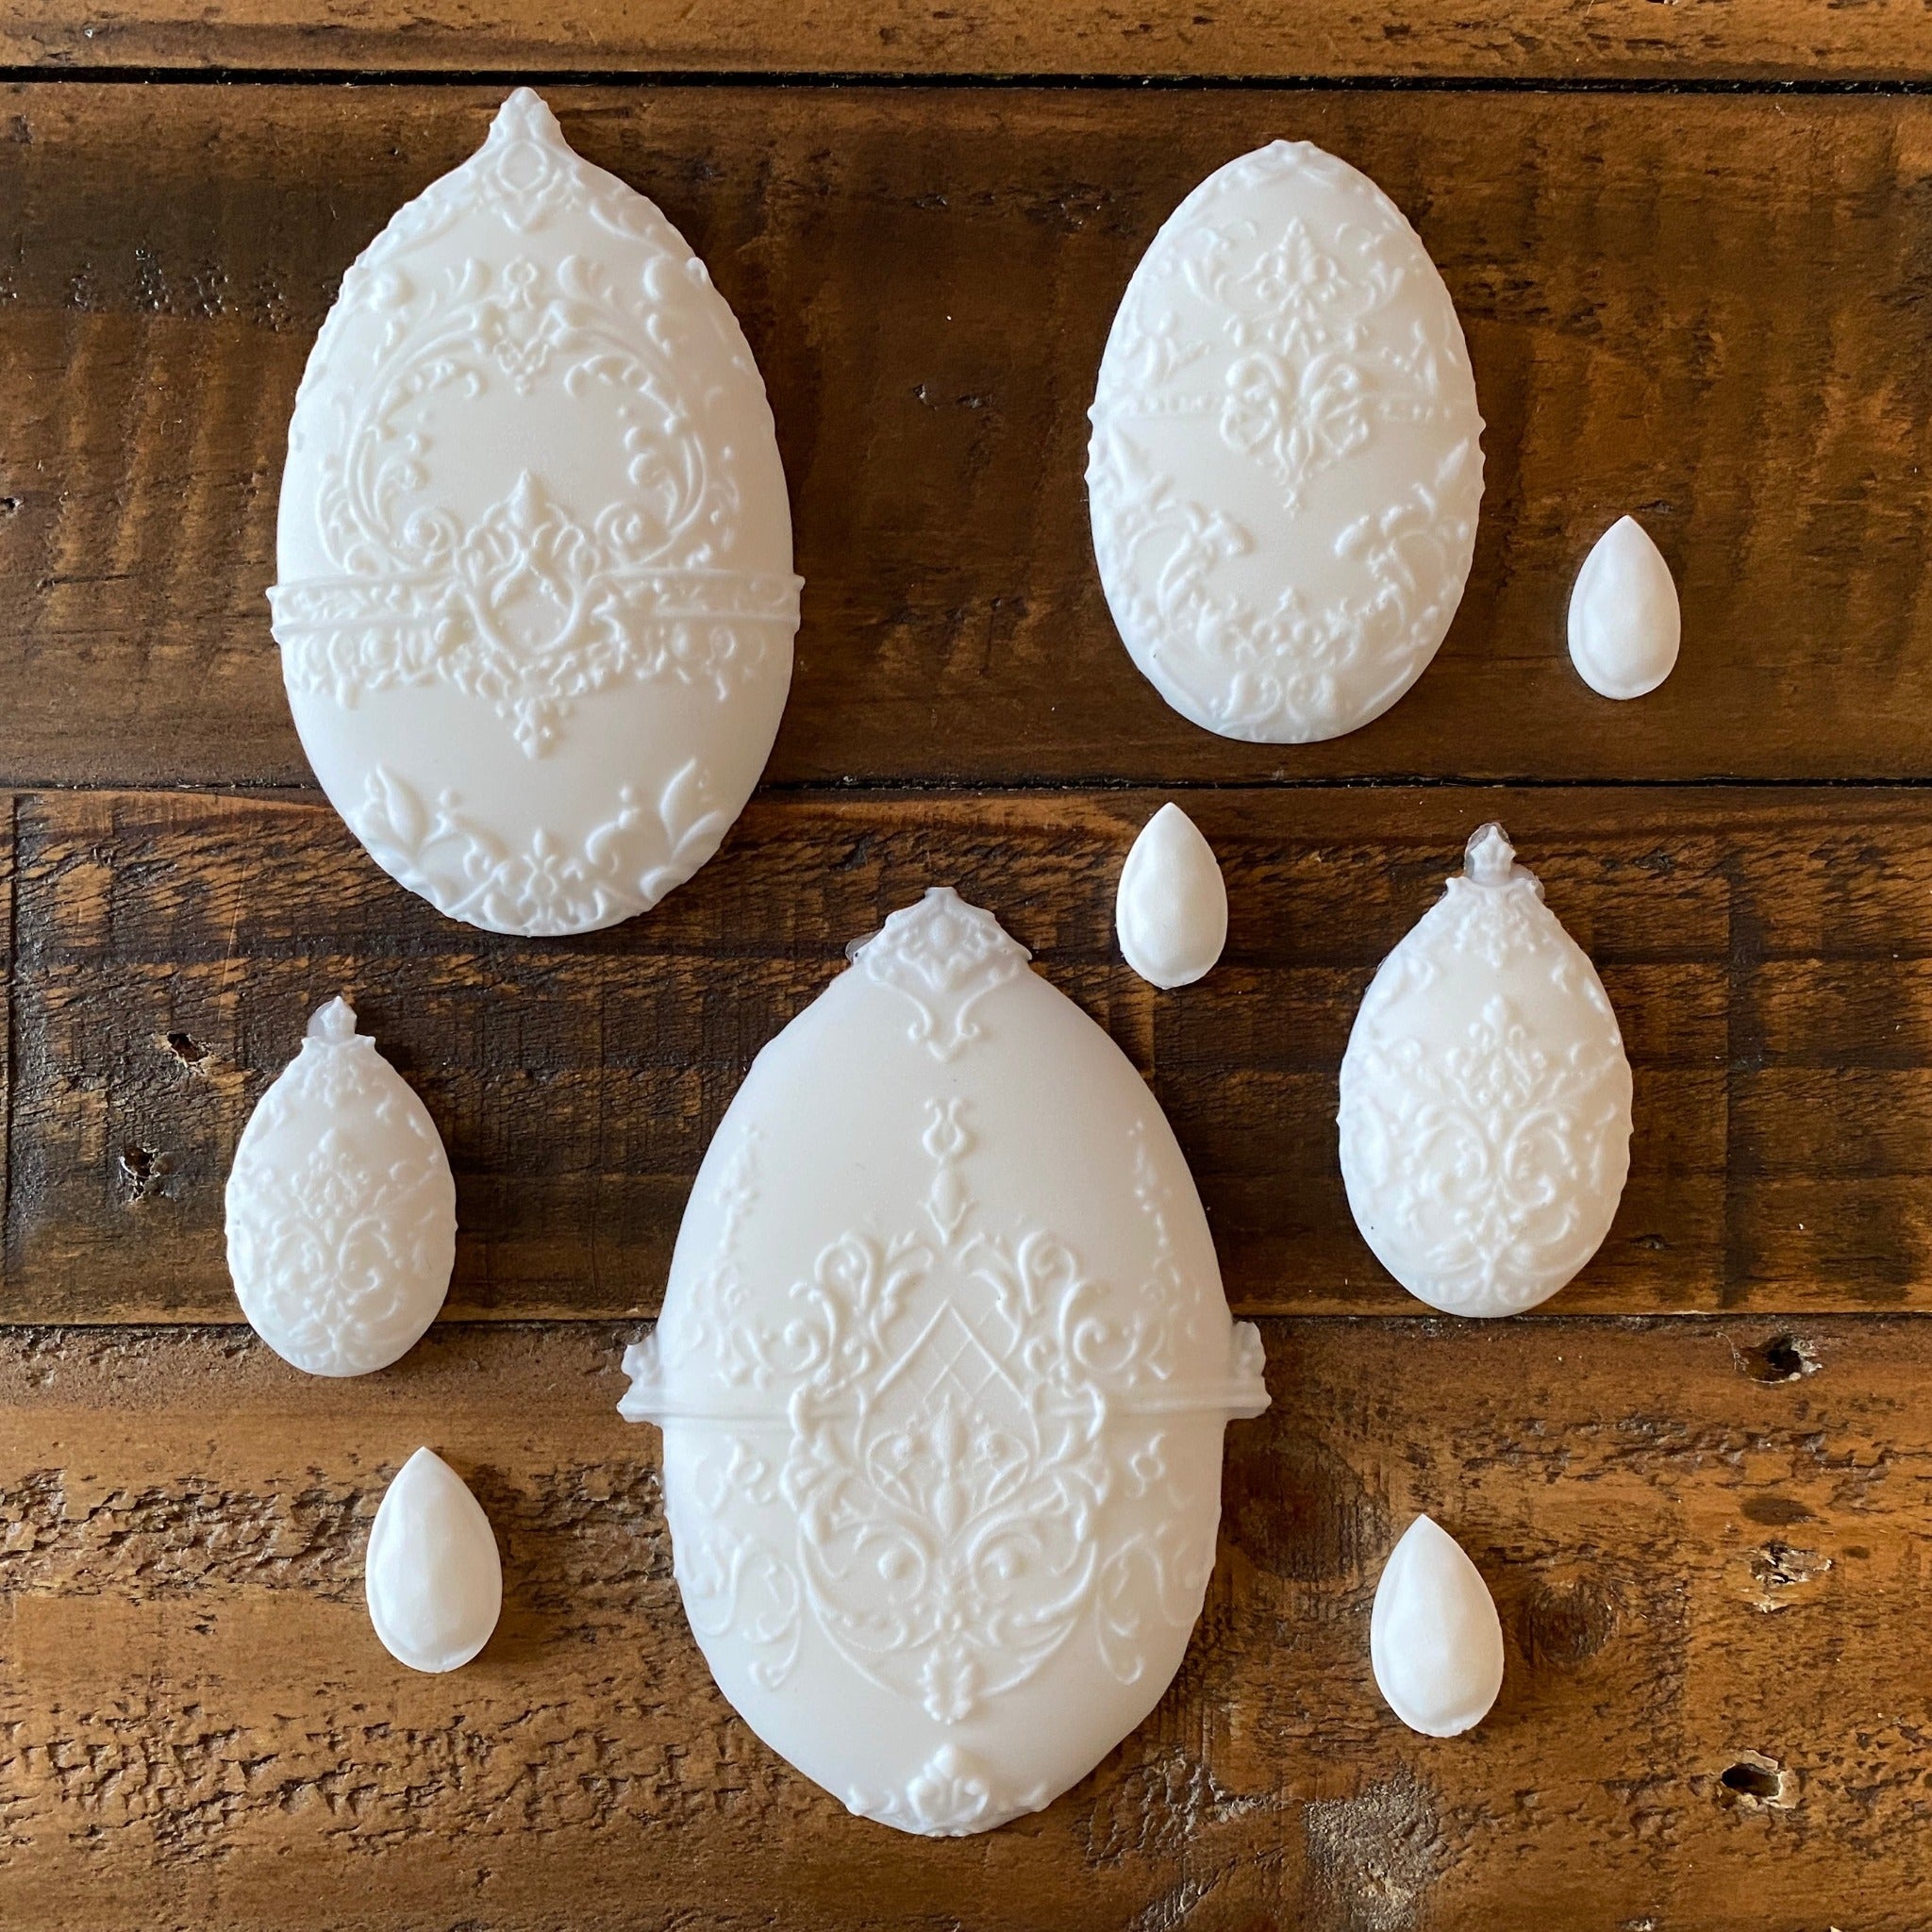 White silicone mould castings of 5 varying sizes of ornately decorated Easter eggs and 4 small teardrop pendants are against a wood background.